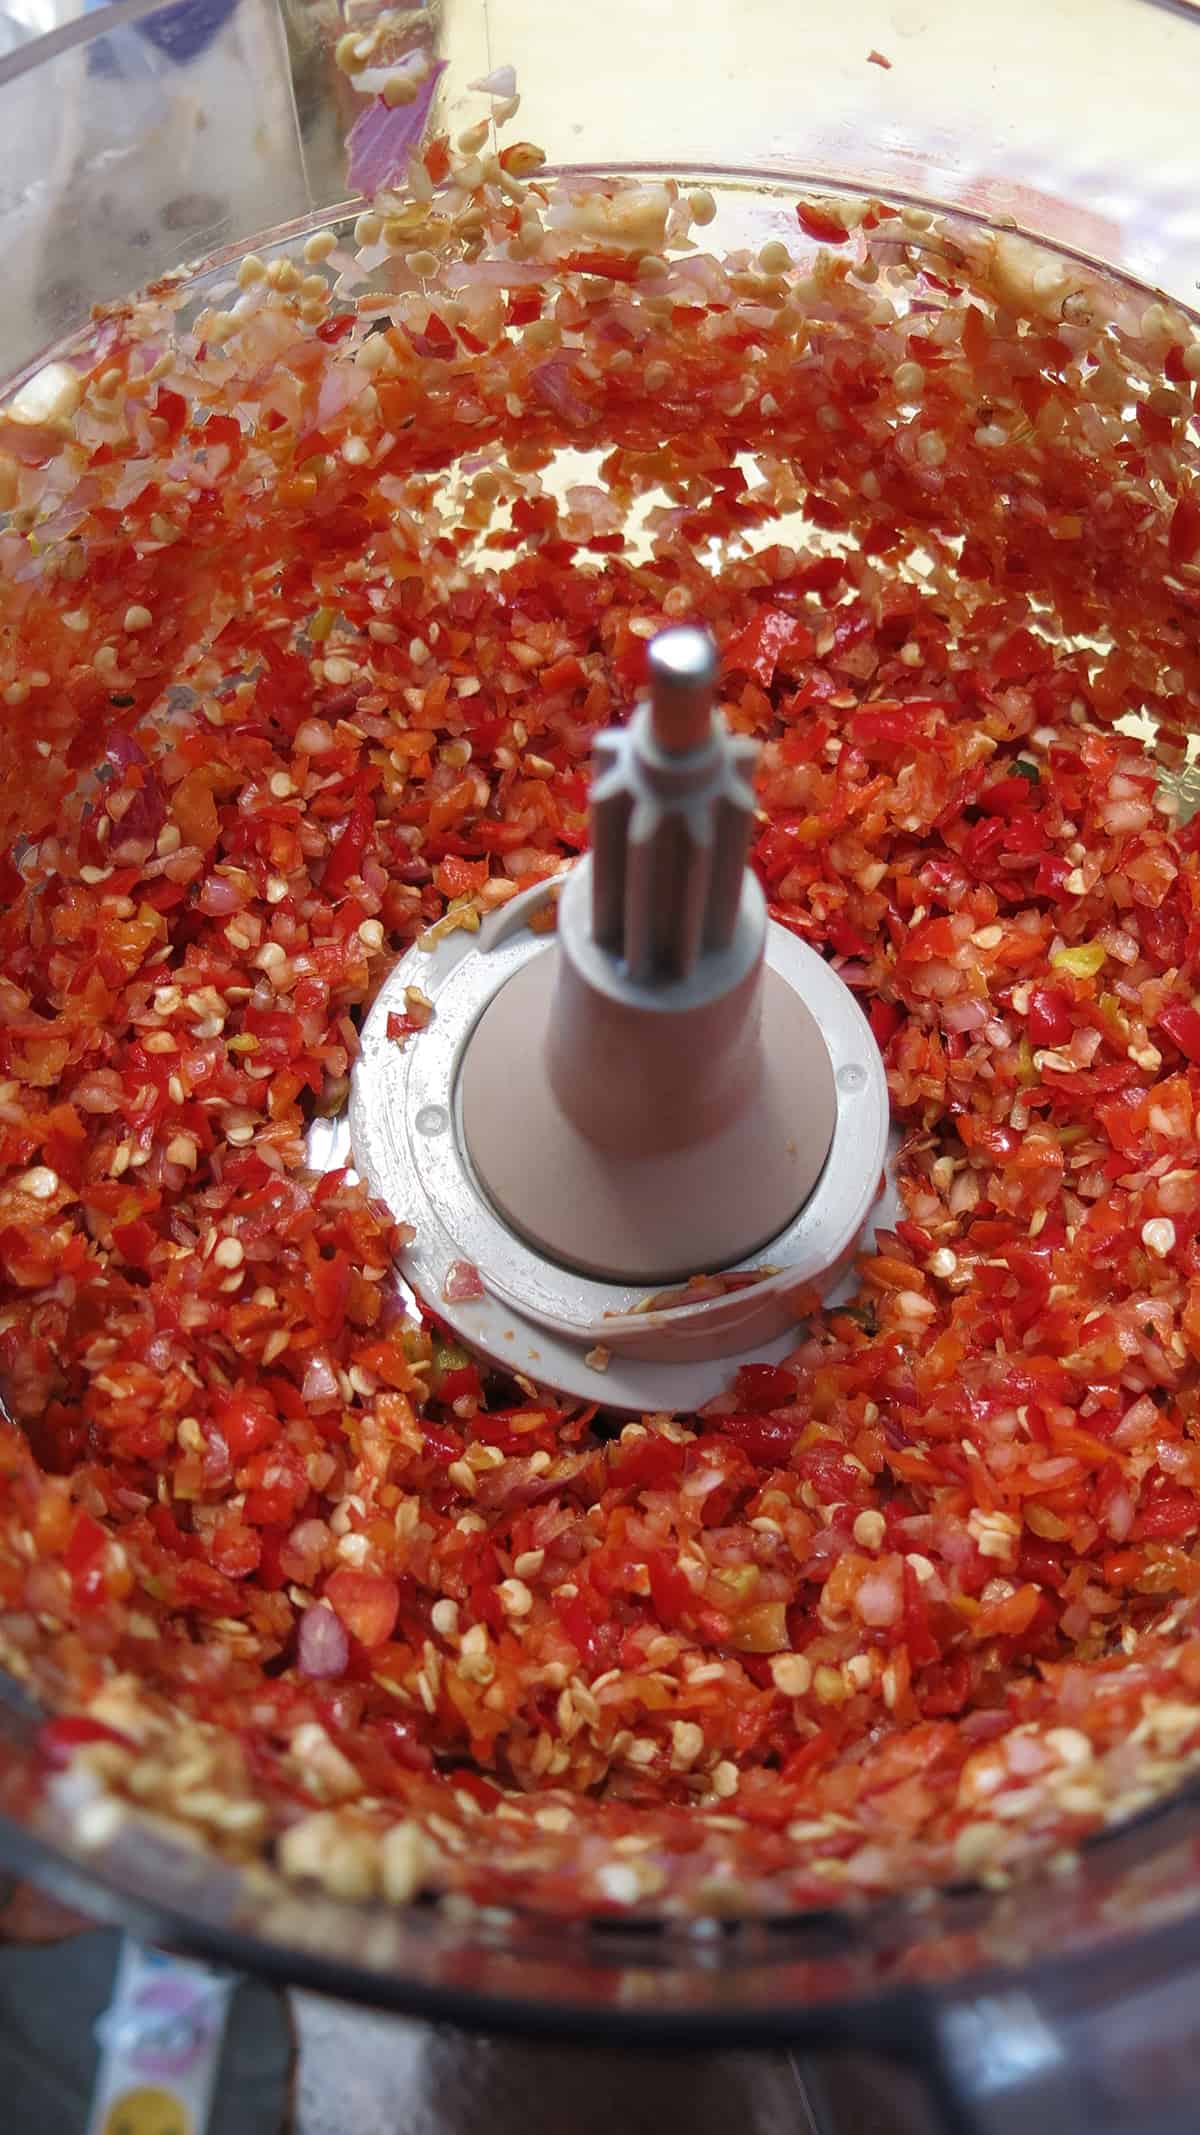 How to Grind Spices in a Food Processor